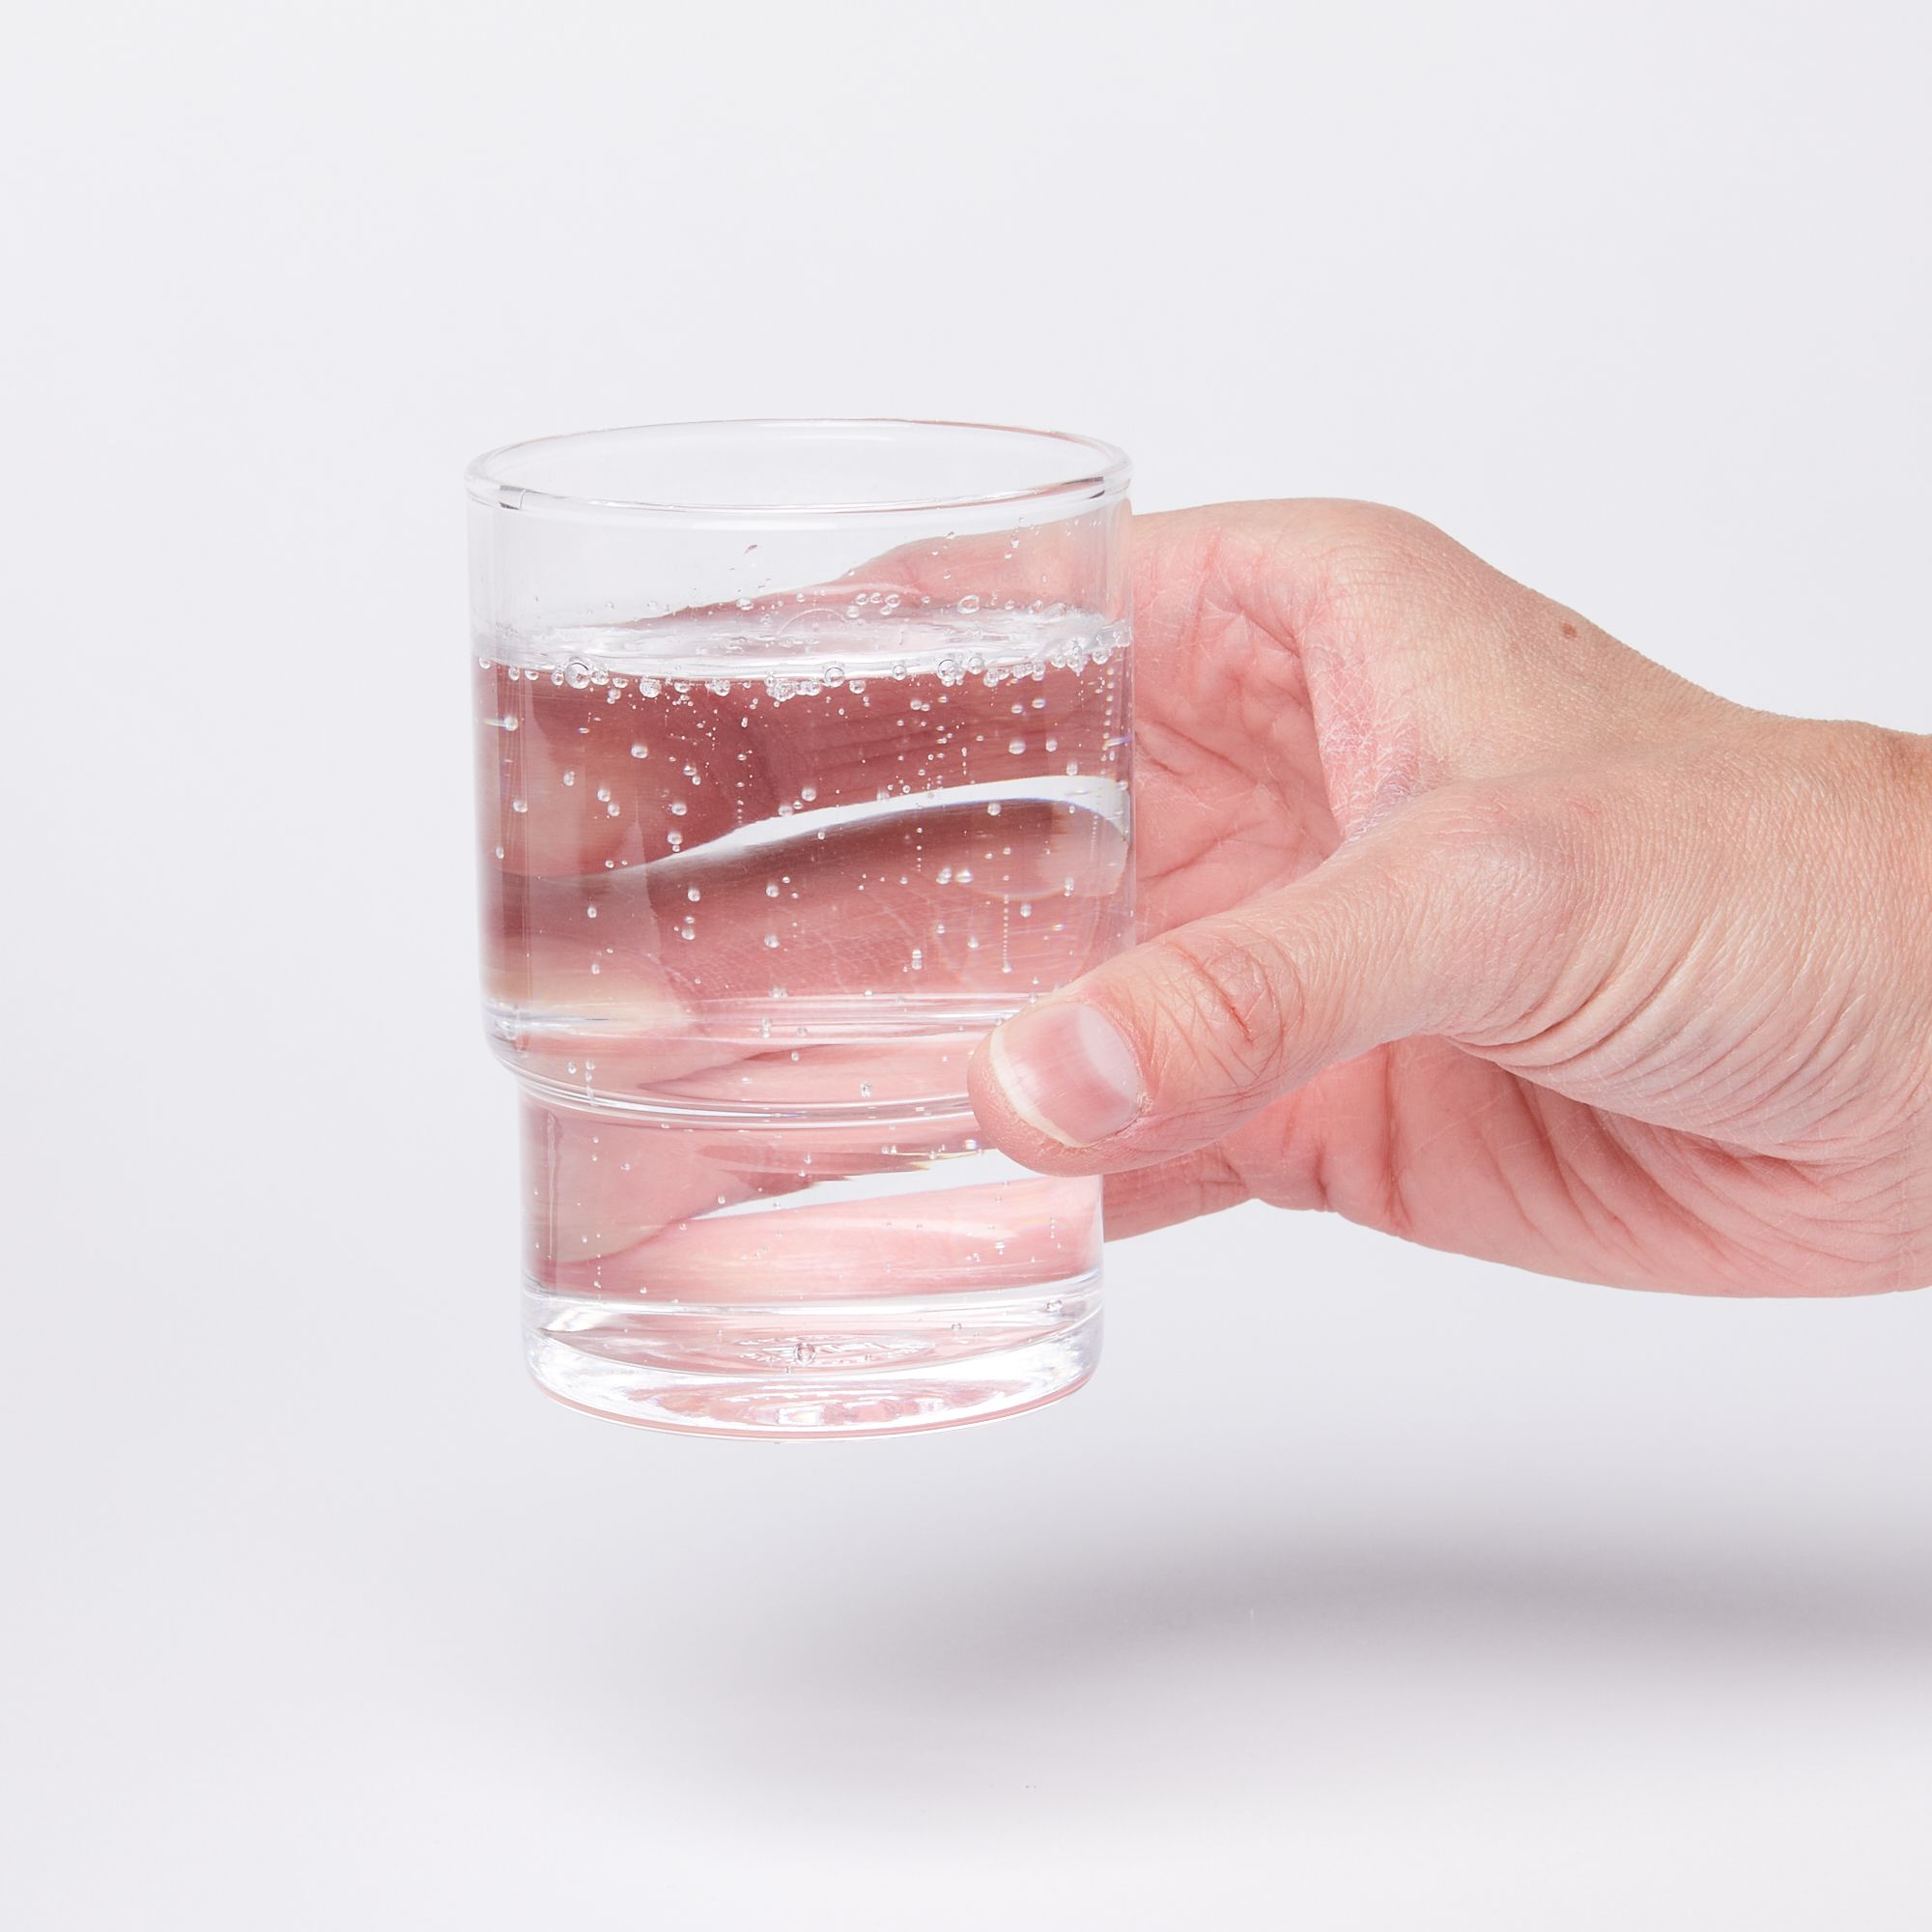 Hand holding a clear cylindrical glass with a wider top half with a narrower bottom half, full of water